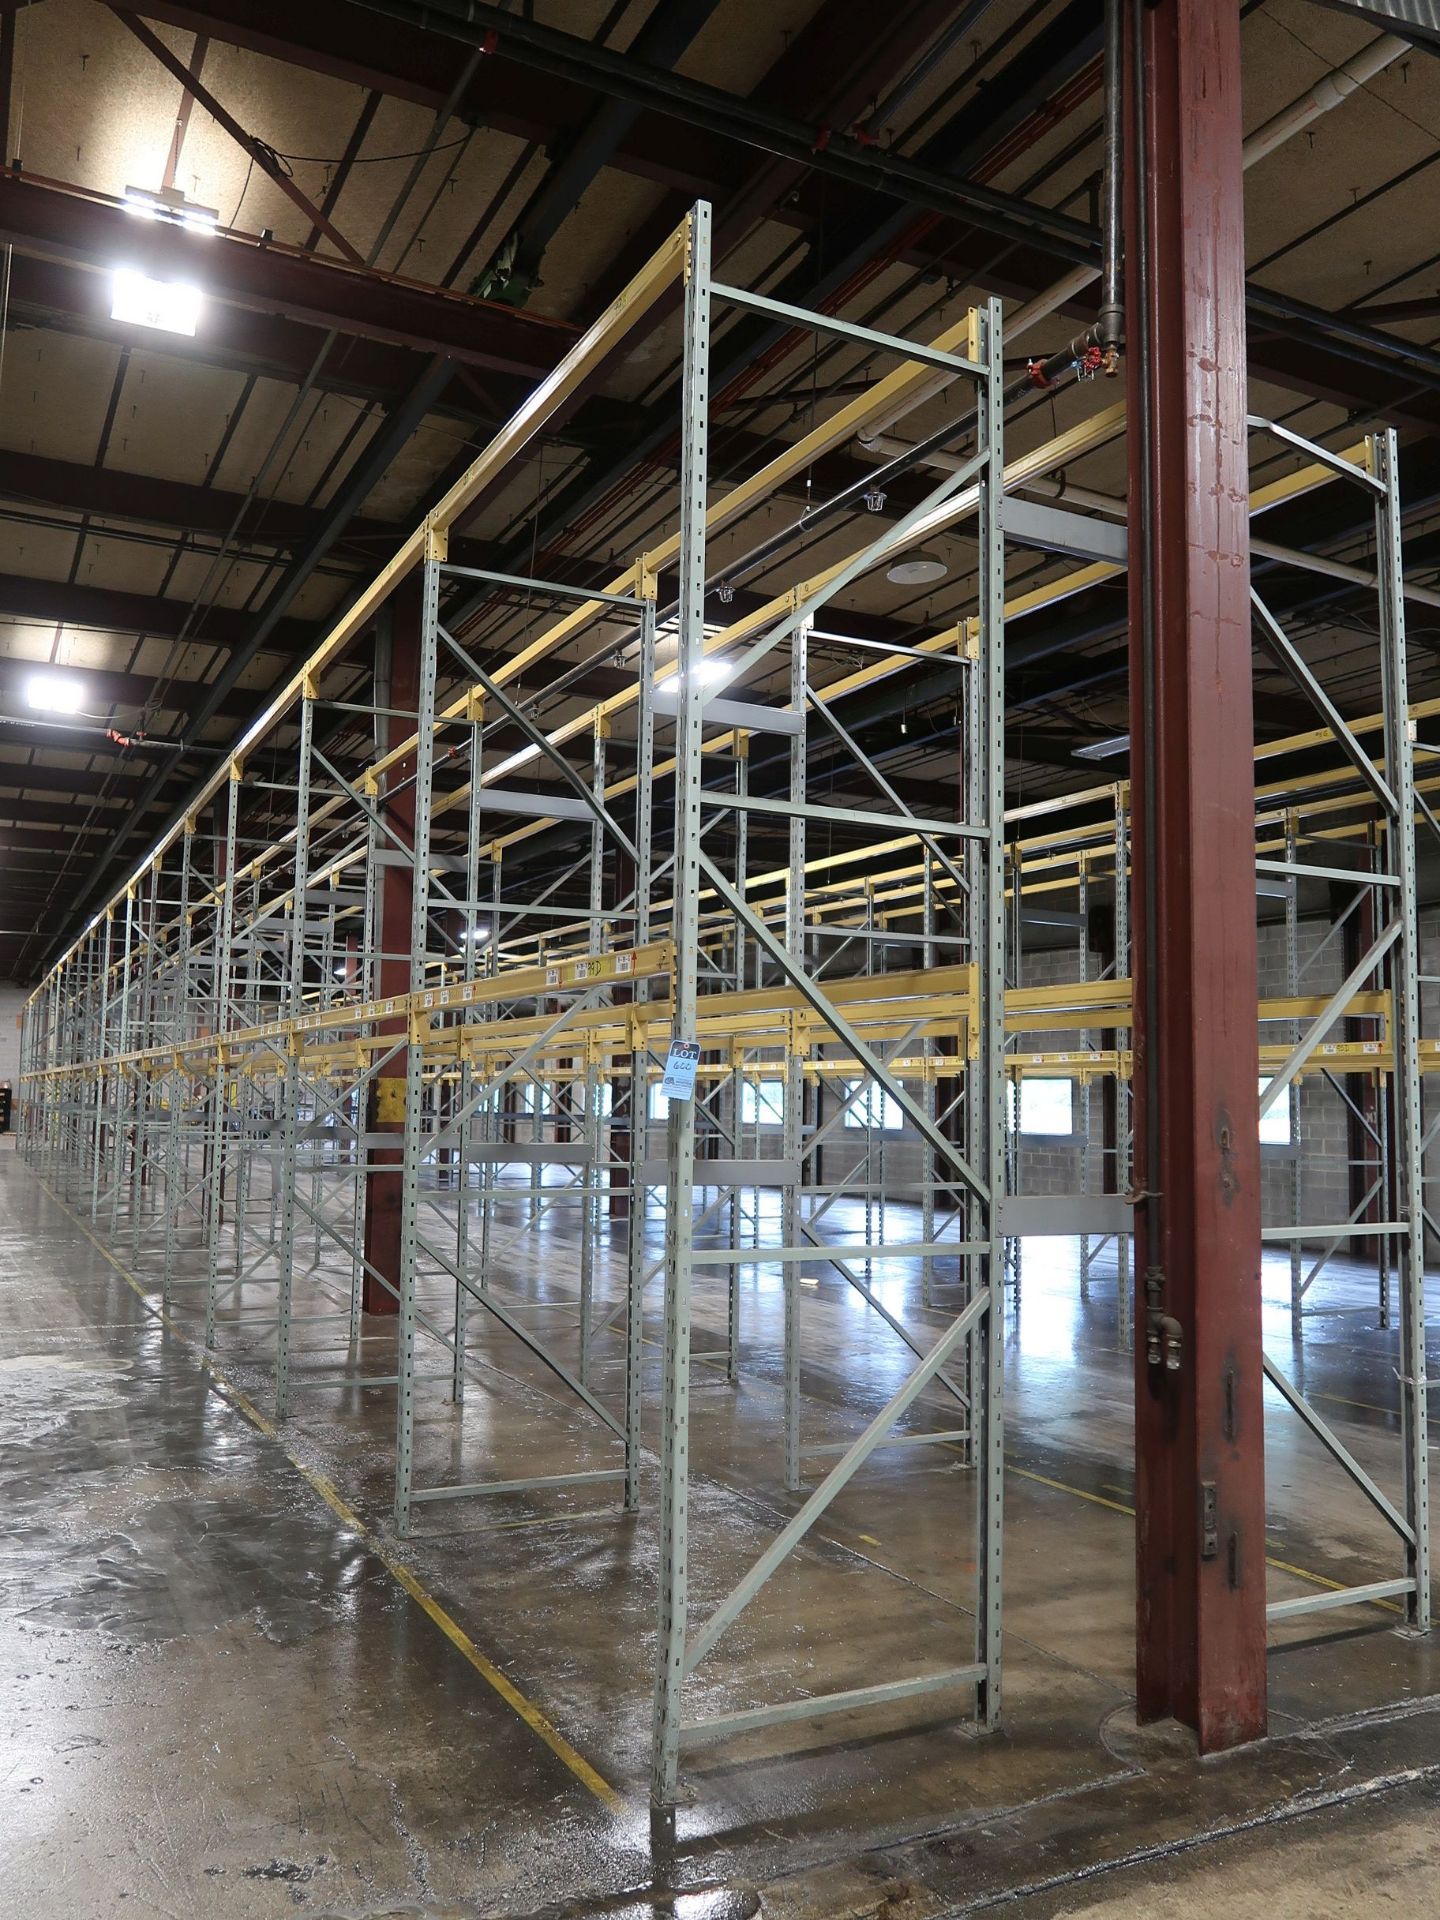 SECTIONS 96" X 42" X 168" ADJUSTABLE BEAM PALLET RACK; (38) 42" X 168" UPRIGHTS, (144) 96" X 3"